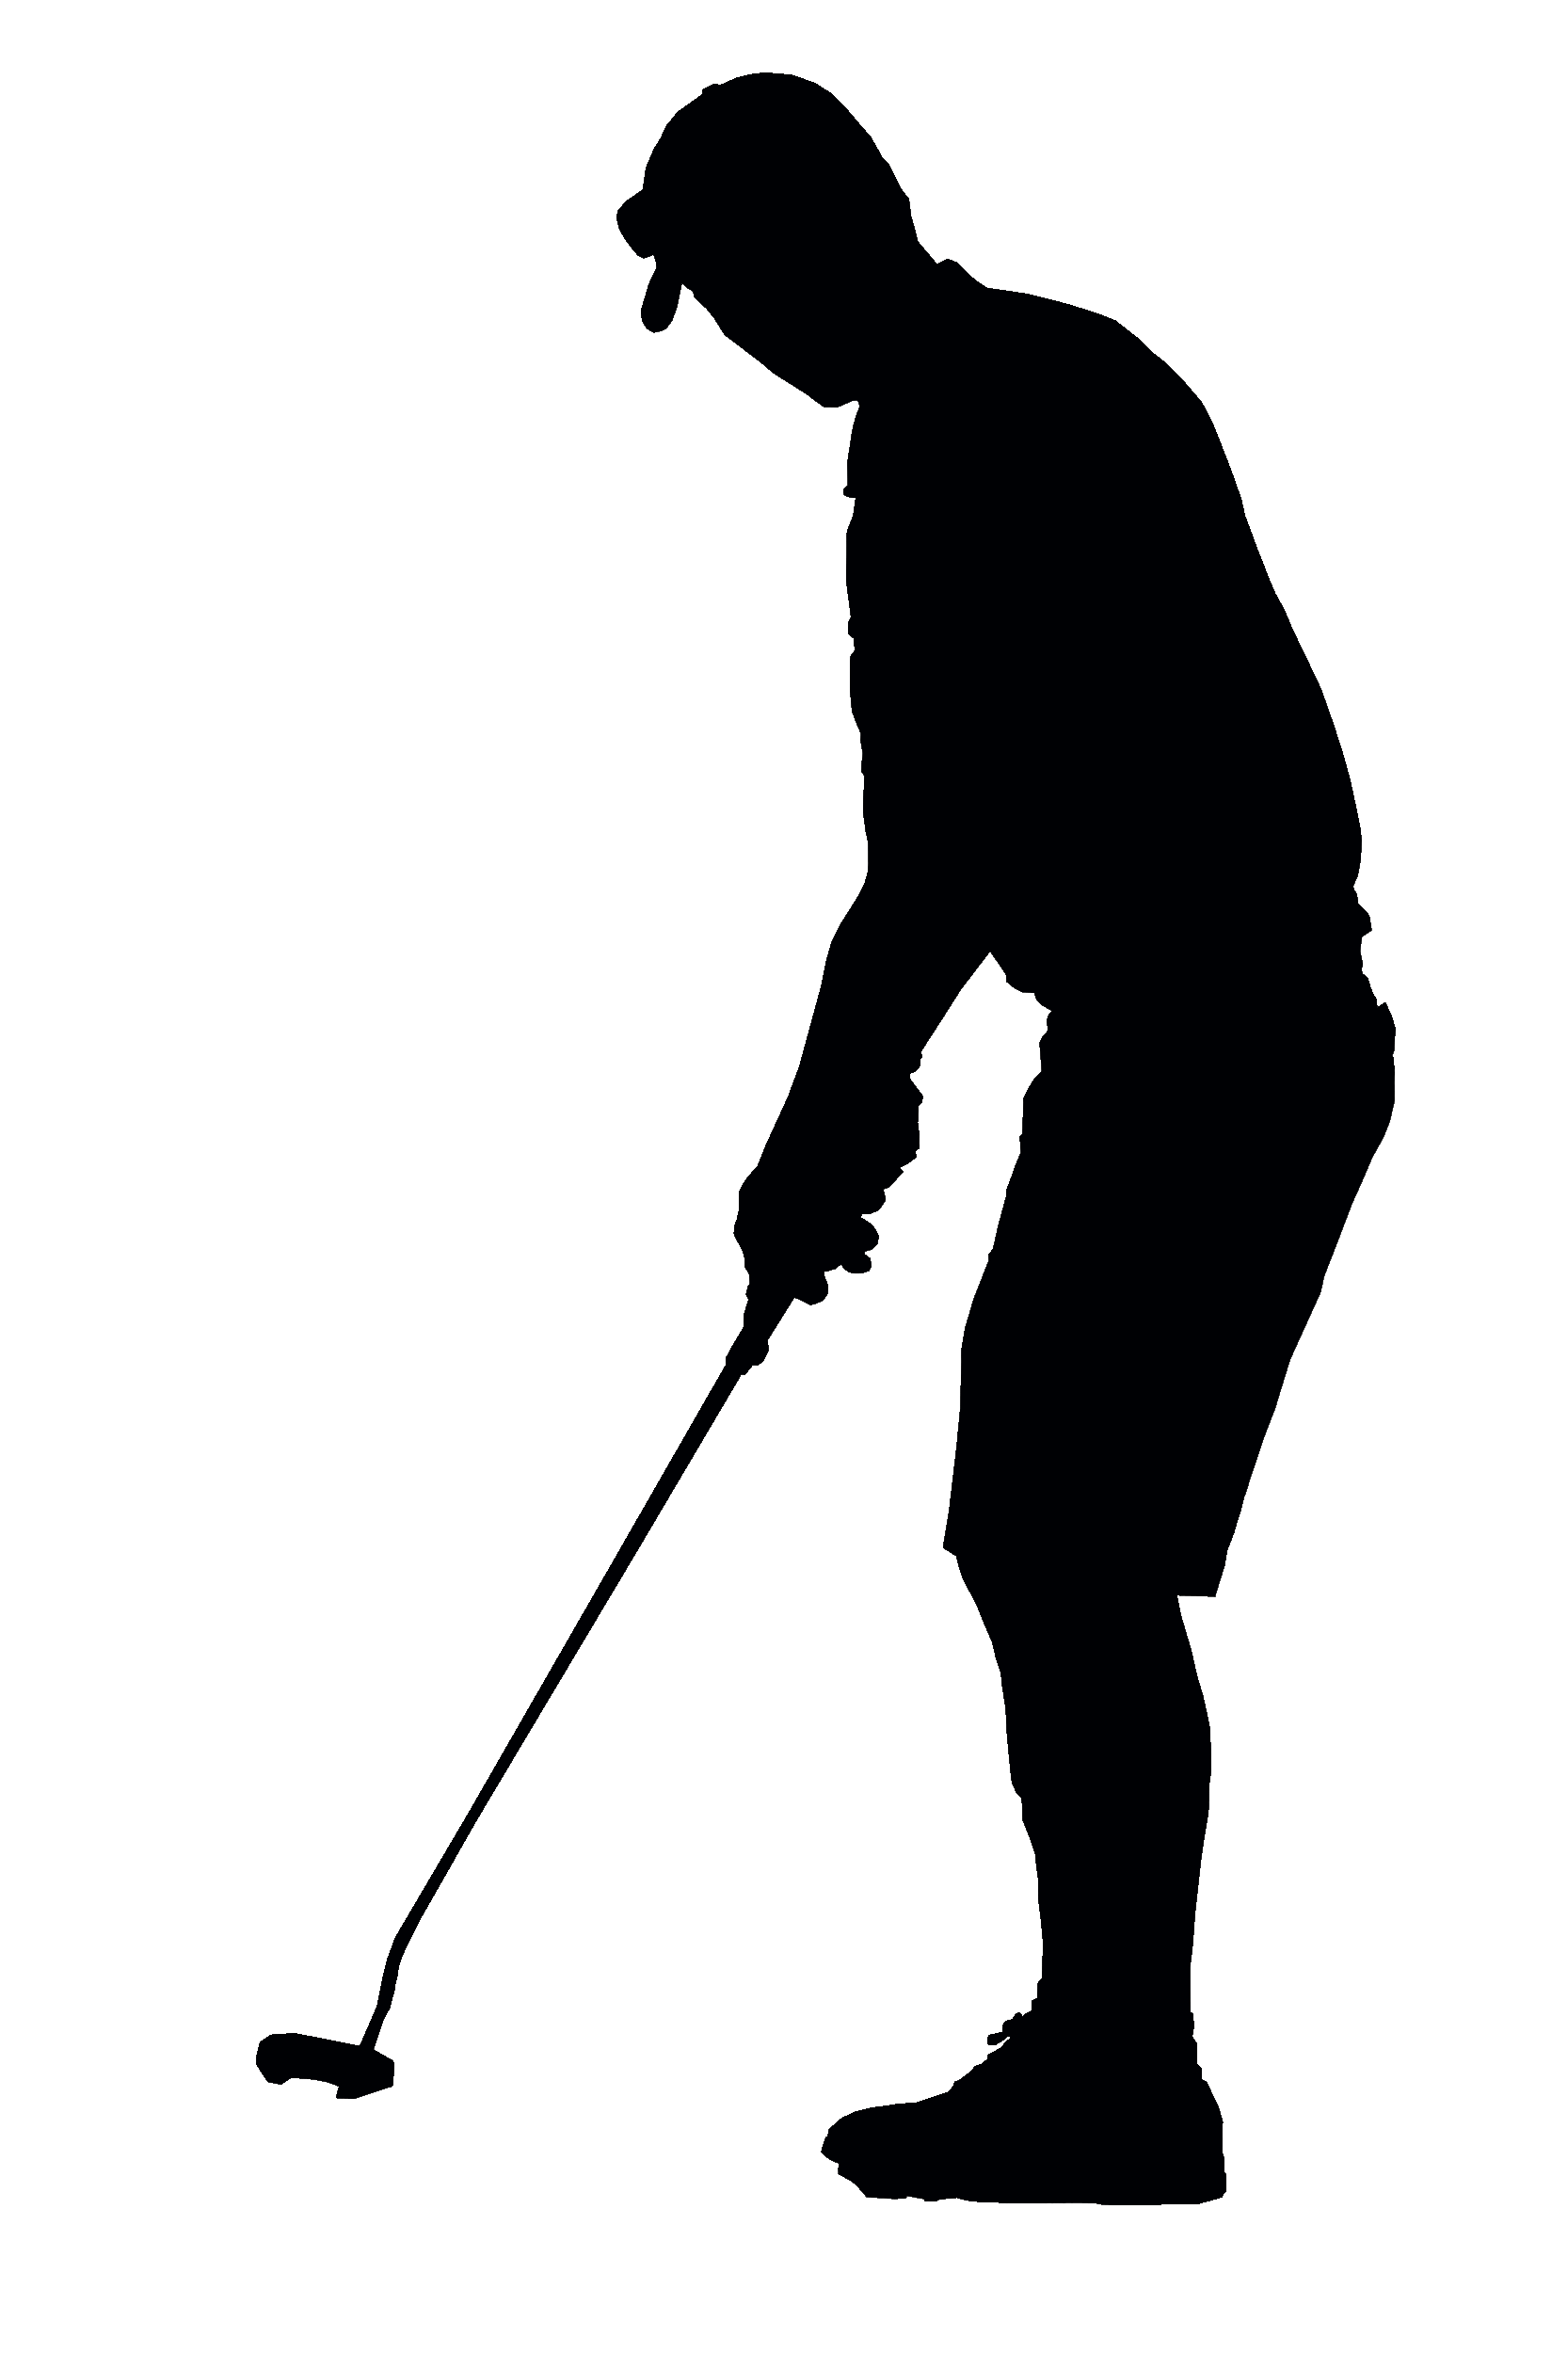 Png images transparent free. Golfing clipart golf team